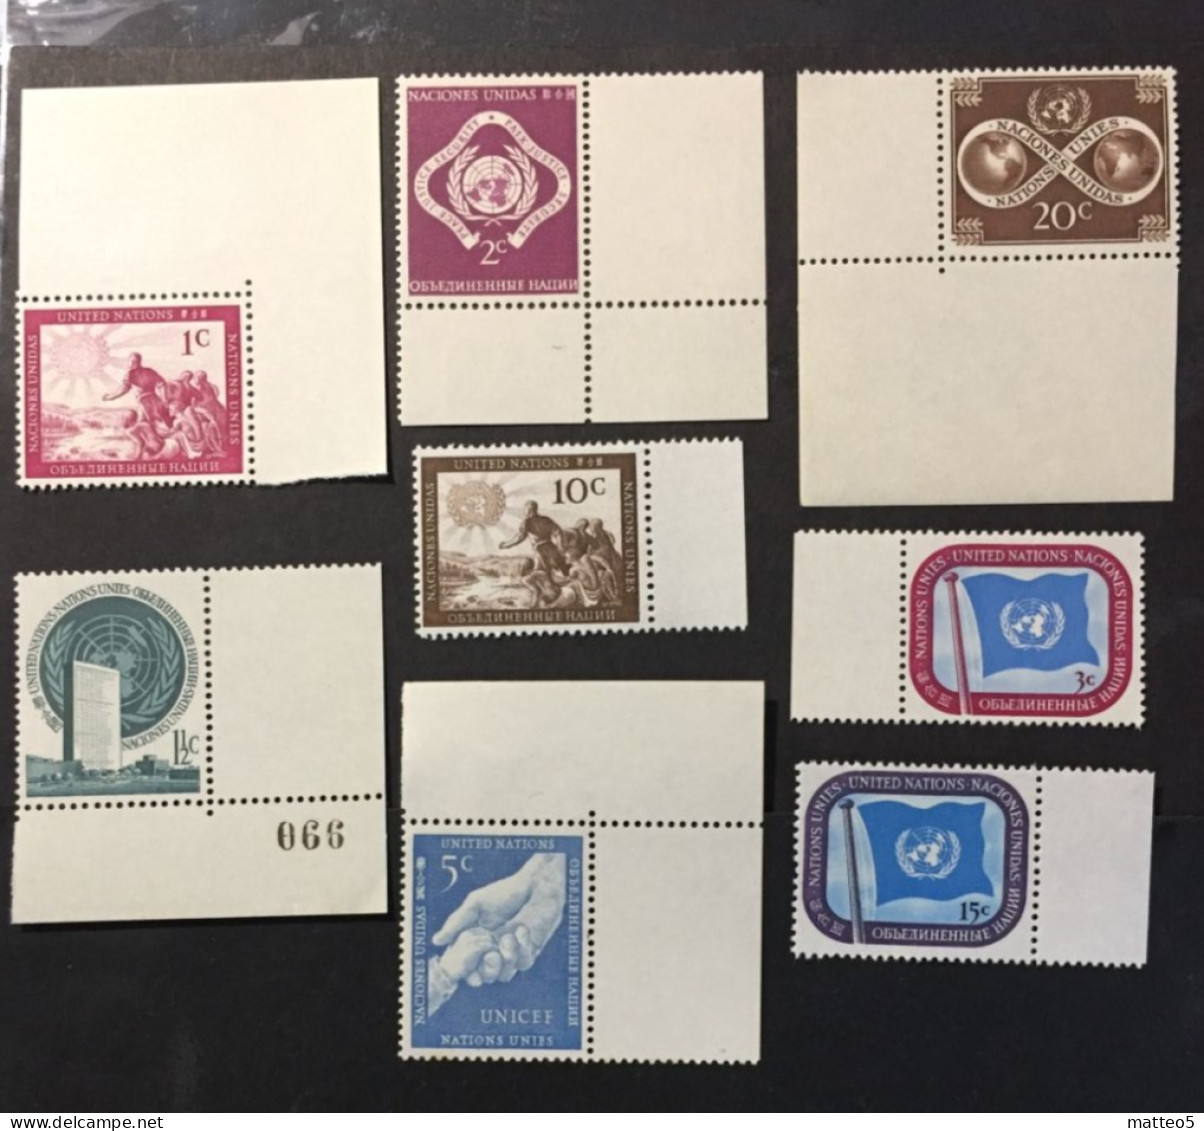 1951 - United Nations UNO UN ONU - 8 Stamps Of The Year 1951 -  Unused - Nuevos